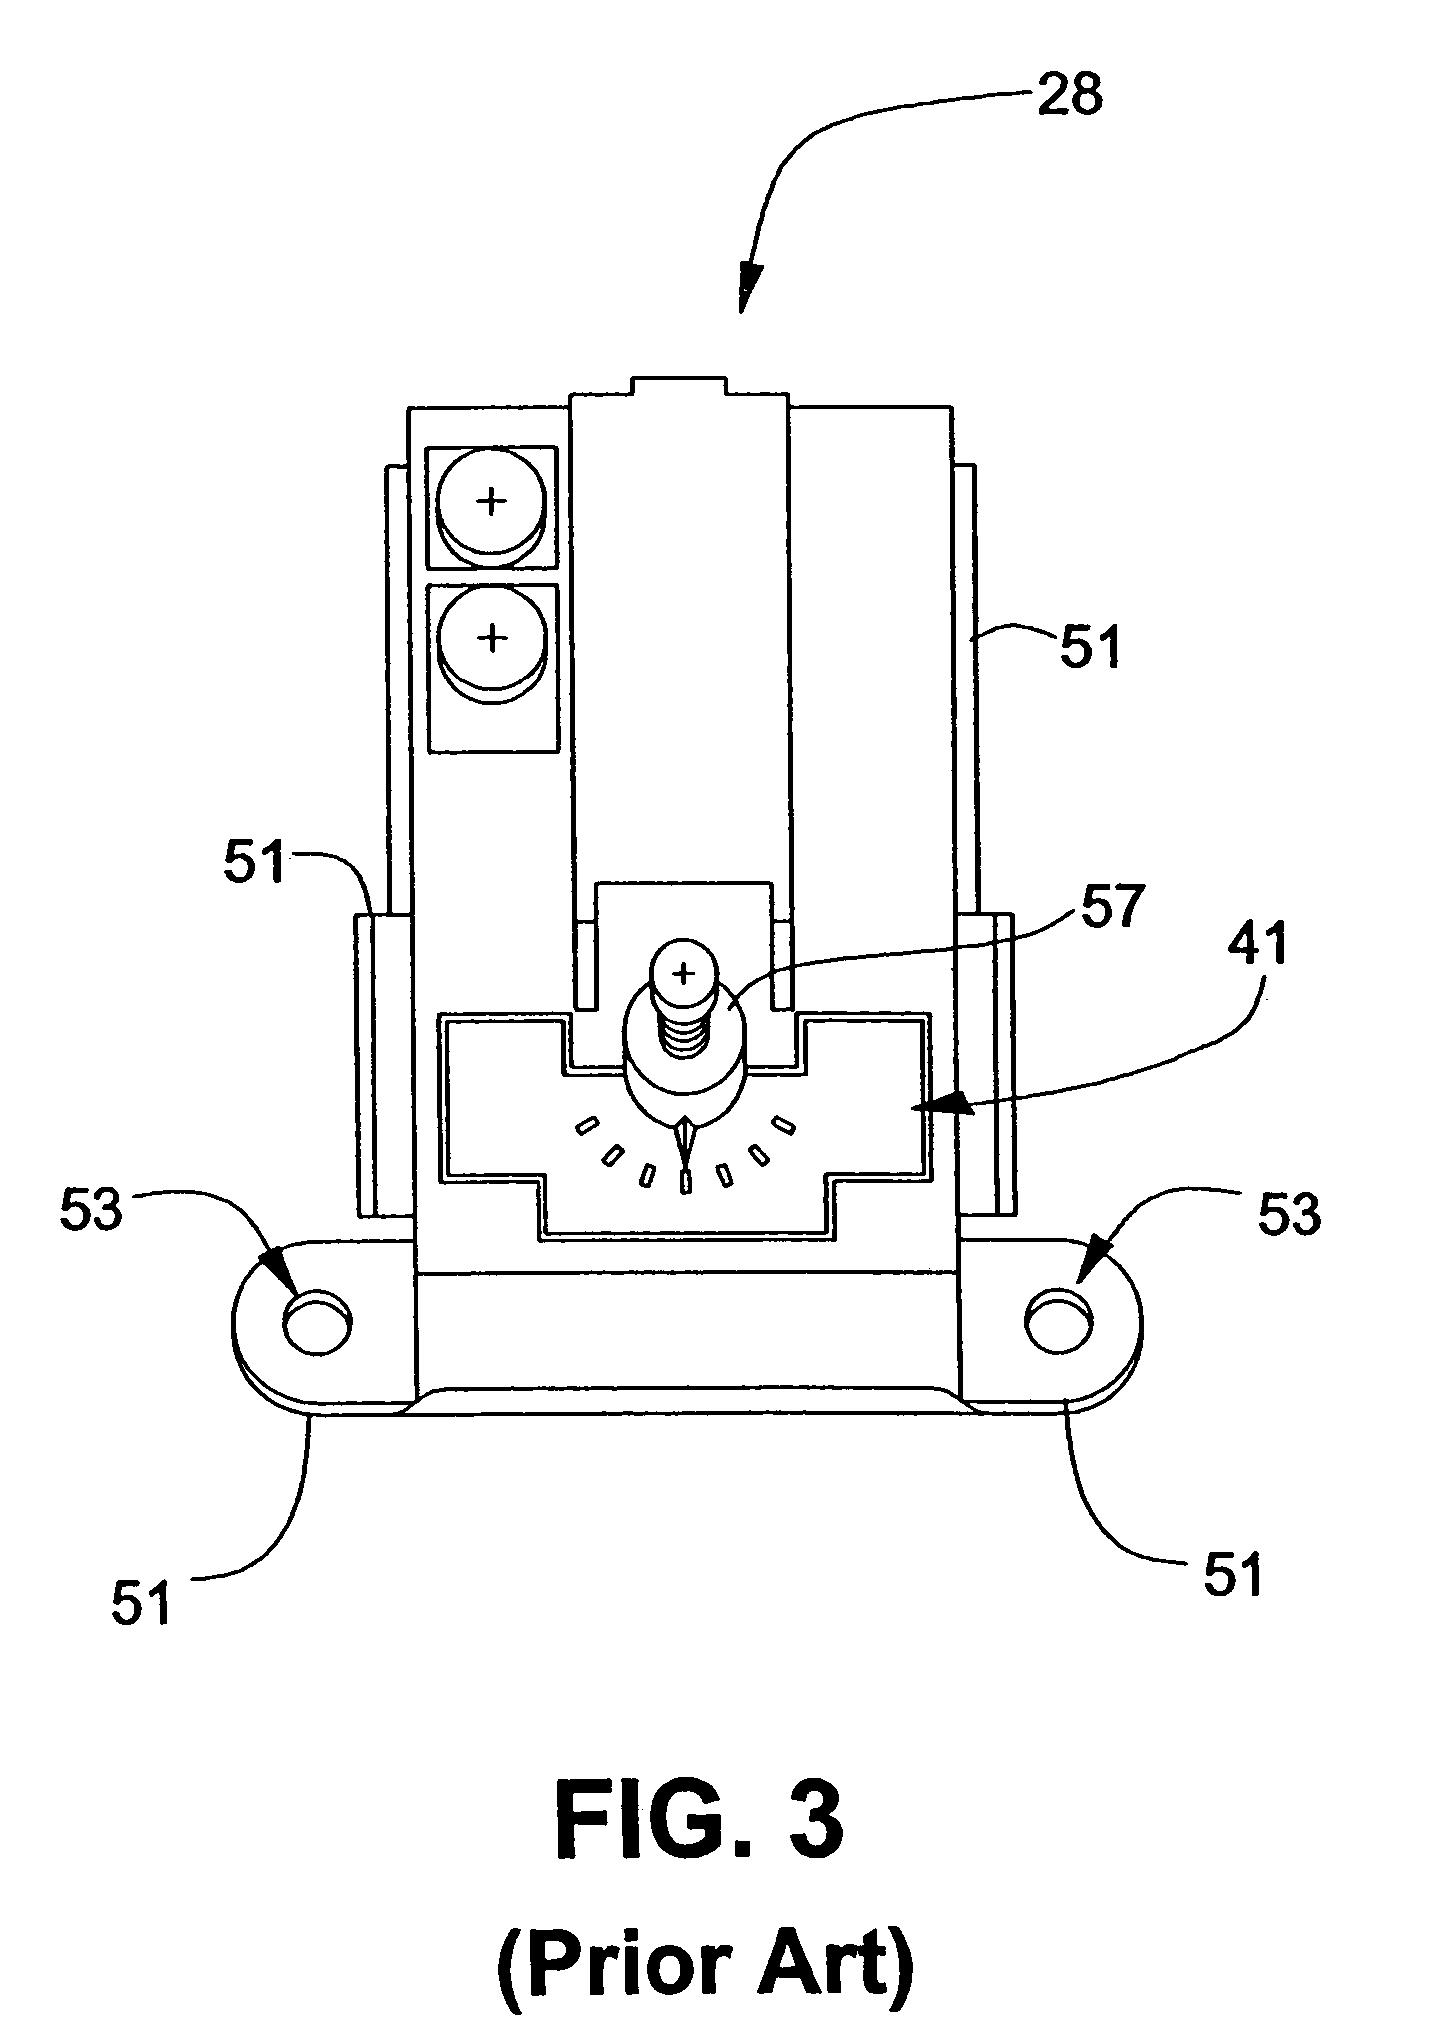 System and method for controlling temperature of a liquid residing within a tank